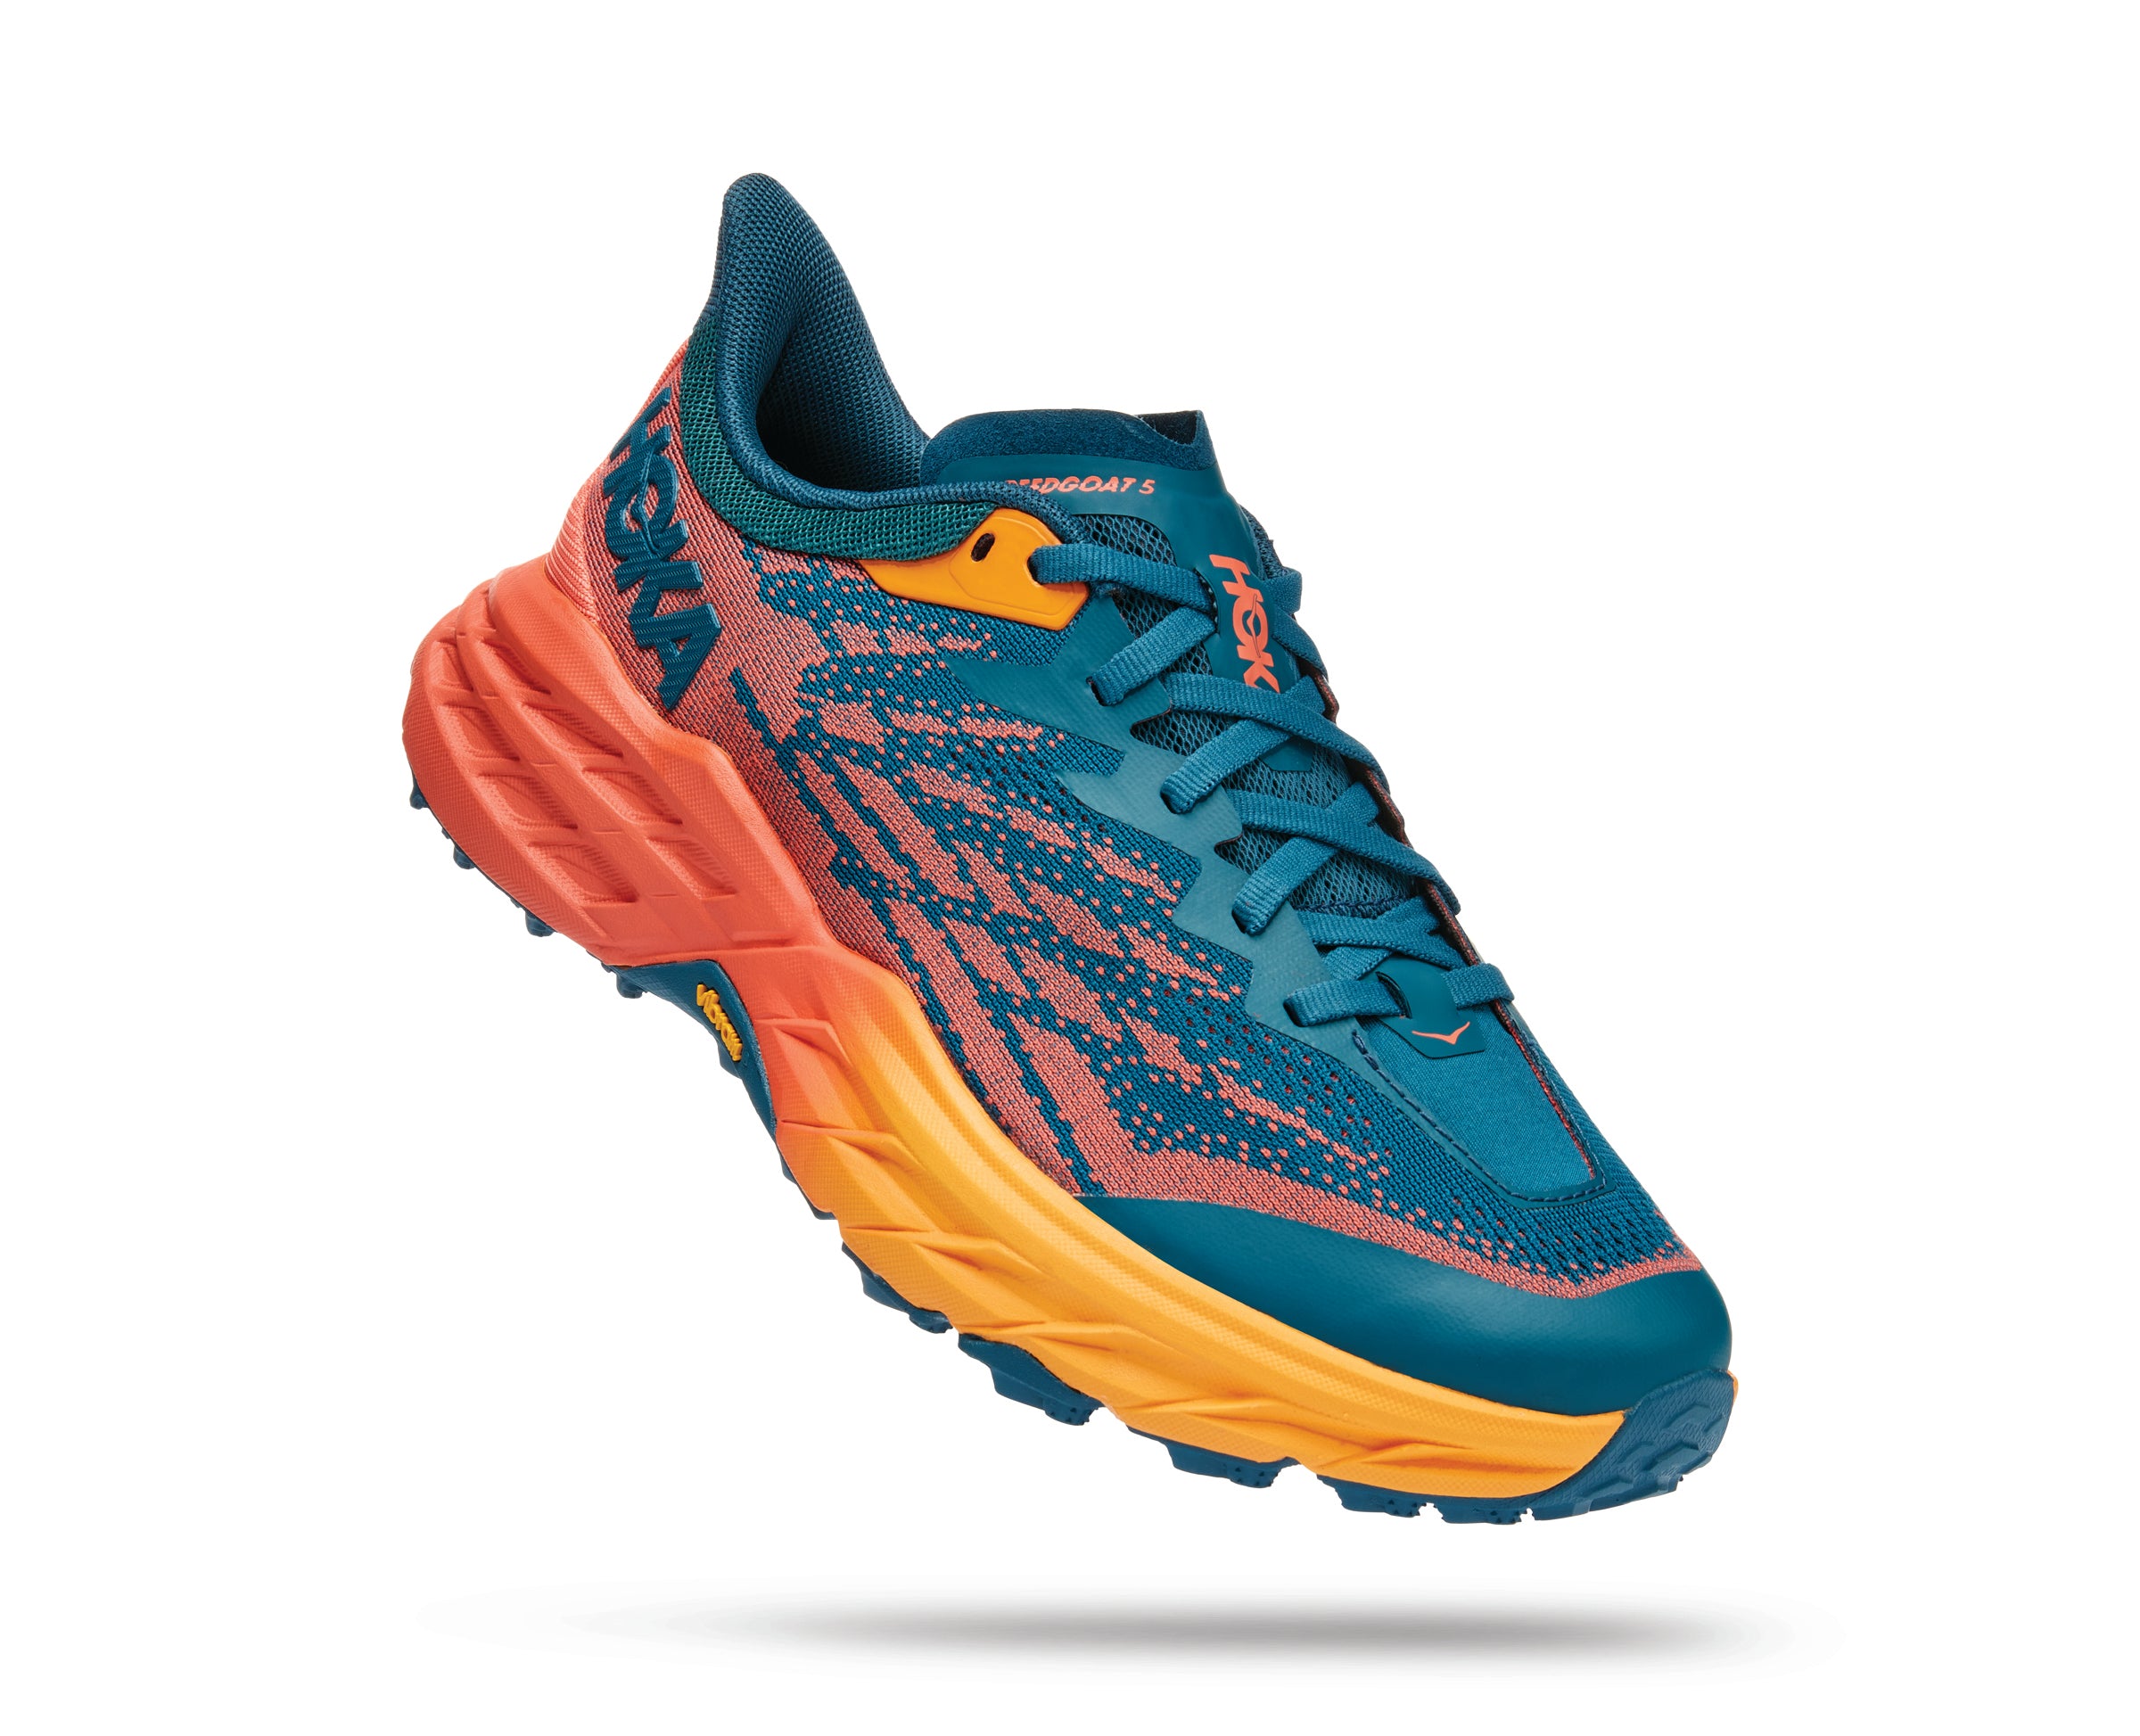 Lateral angled view of the Women's Speedgoat 5 by HOKA in the color Blue Coral / Camellia